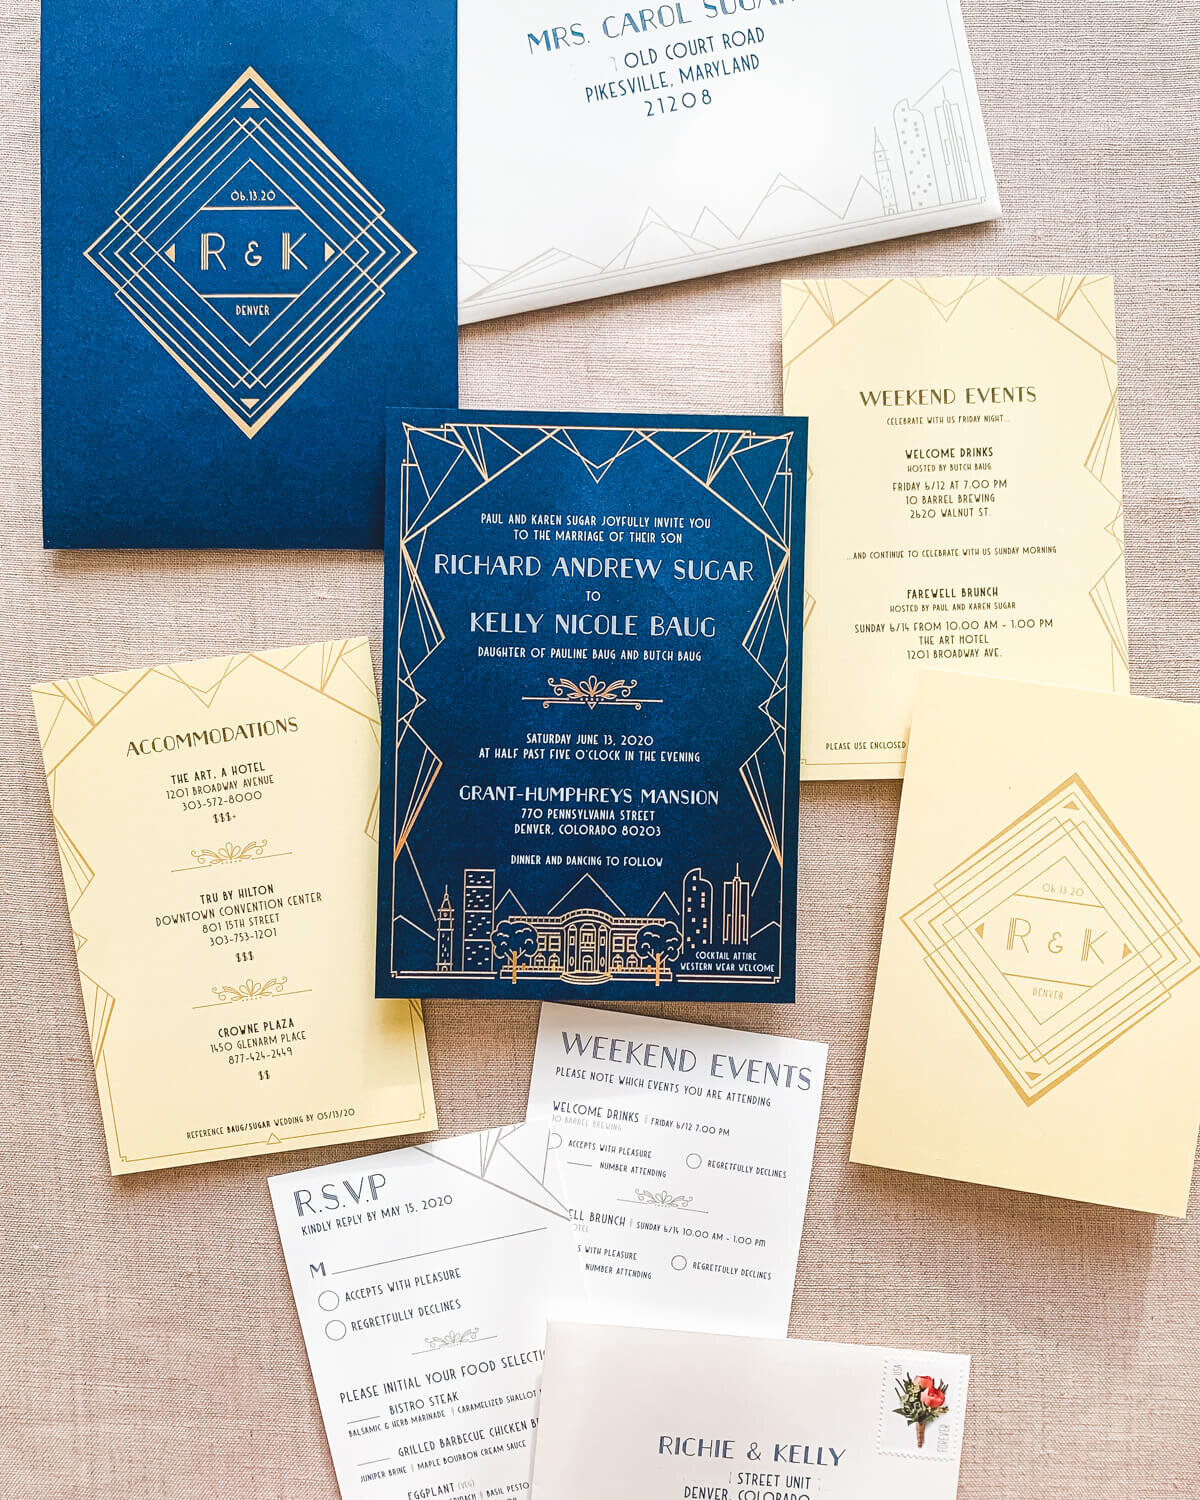 Wedding invitation suite with invitation card, enclosure cards, and reply cards.